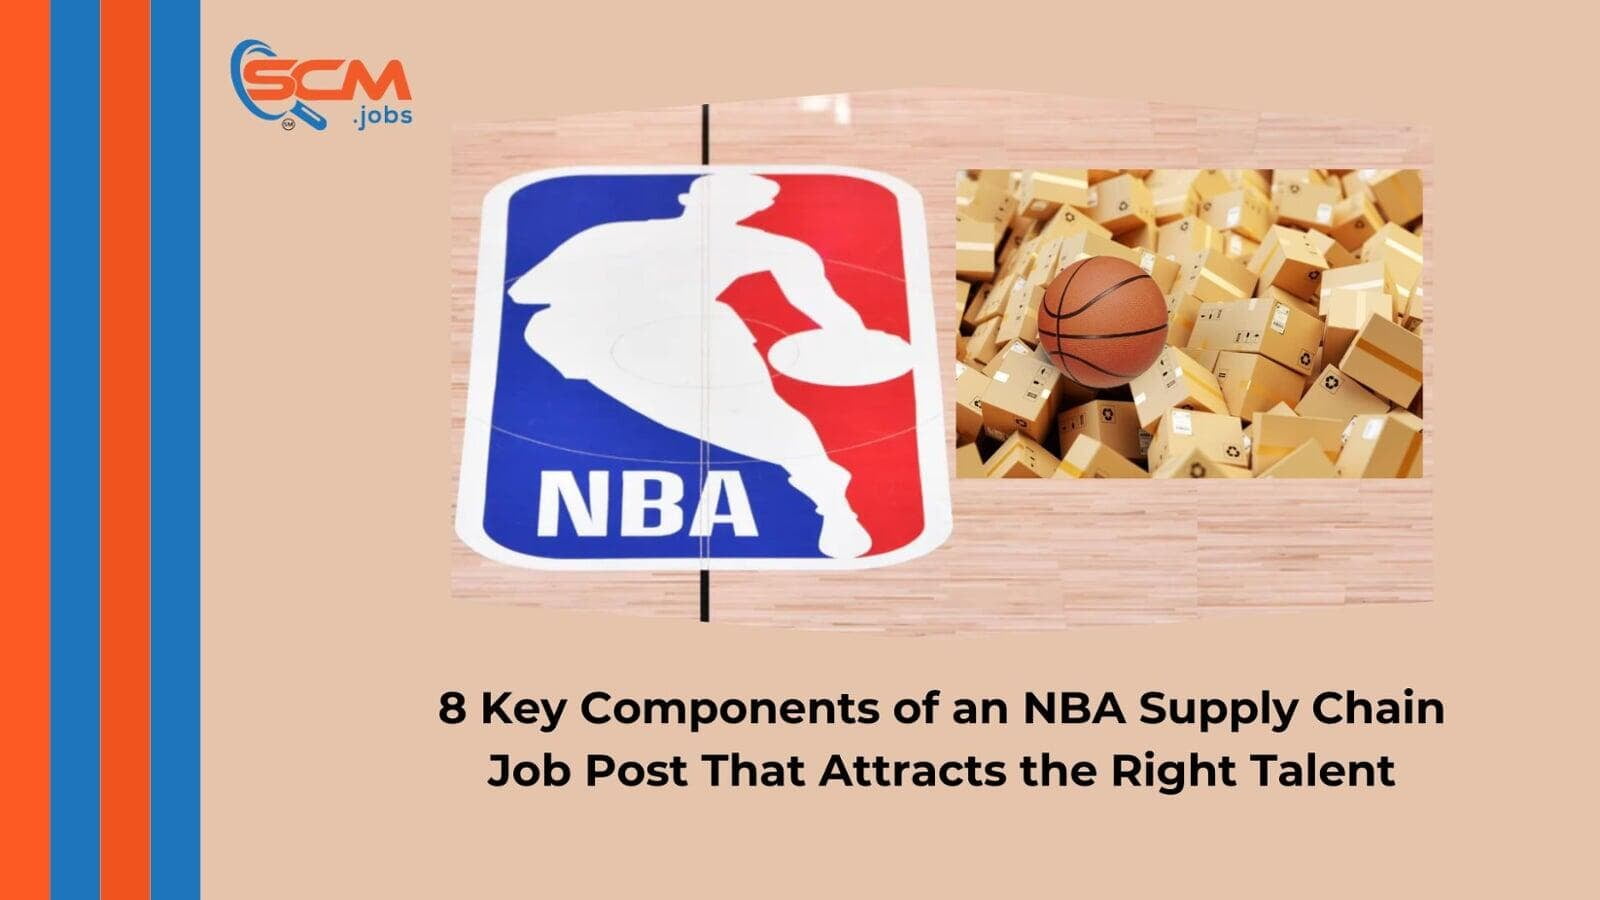 8 Key Components of an NBA Supply Chain Job Post That Attracts the Right Talent